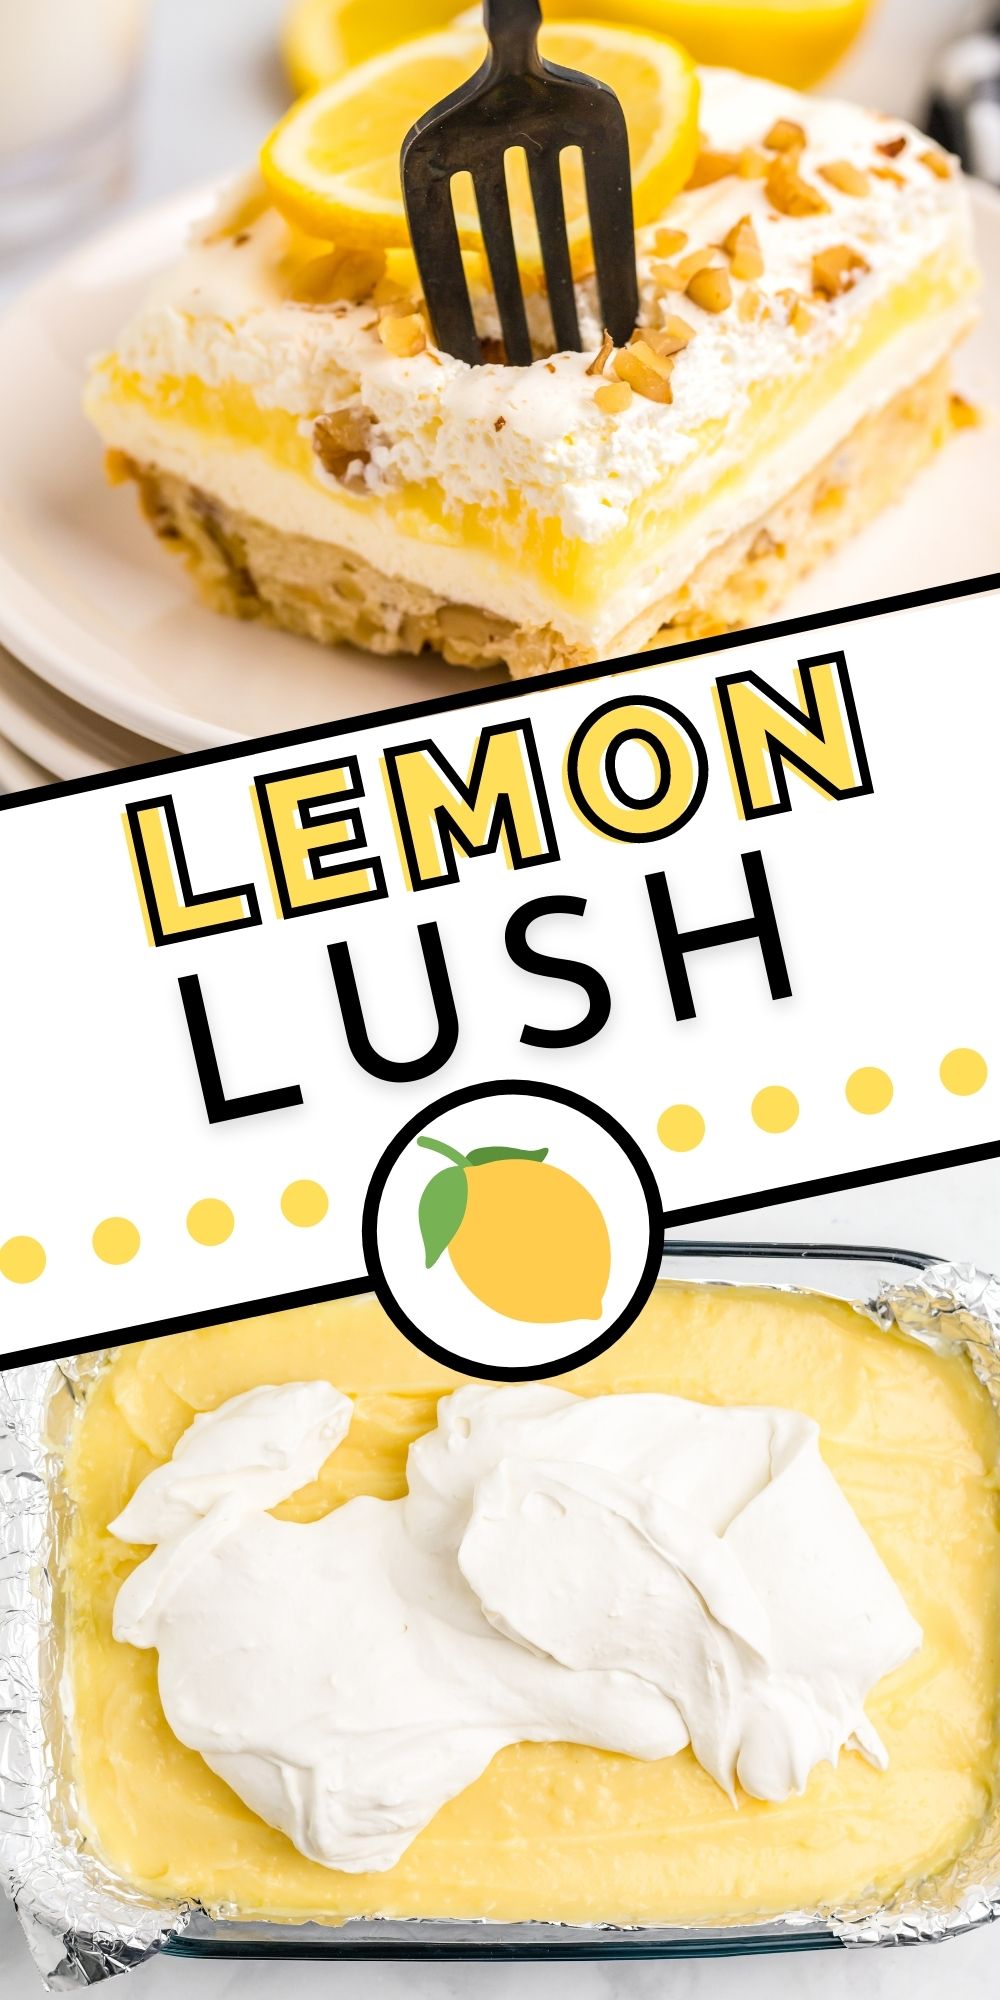 Lemon Lush is a layered dessert with a shortbread crust, sweetened cream cheese, lemon pudding, and whipped cream. This recipe is made completely from scratch! via @foodfolksandfun